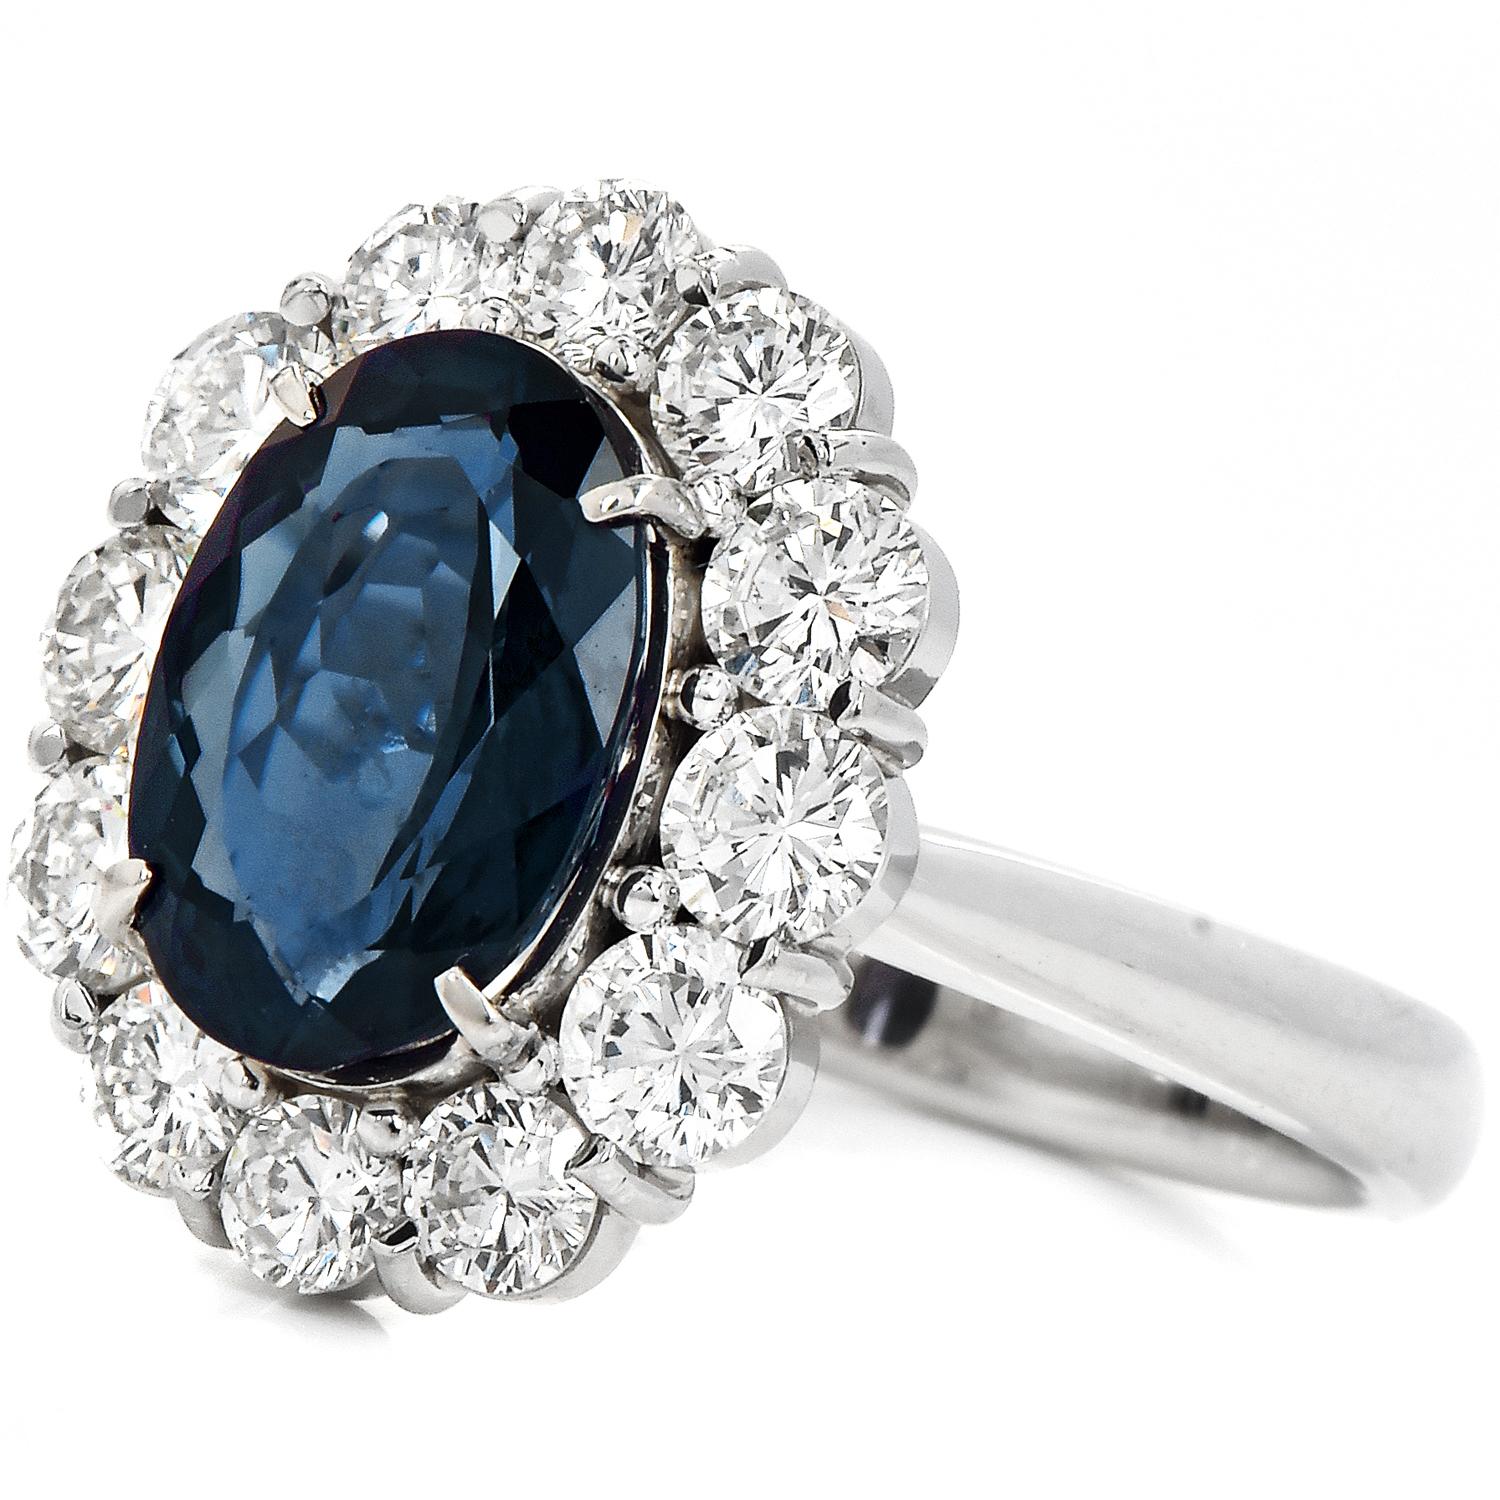 A Halo flower-inspired Cocktail ring, with romance and mystery.

This Lady Diana Style ring is Crafted in solid Platinum 900.

This Classic ring is centered with a Genuine GIA Certified Color Changing Brizil origin Rare Alexandrite, Oval Cut, Prong